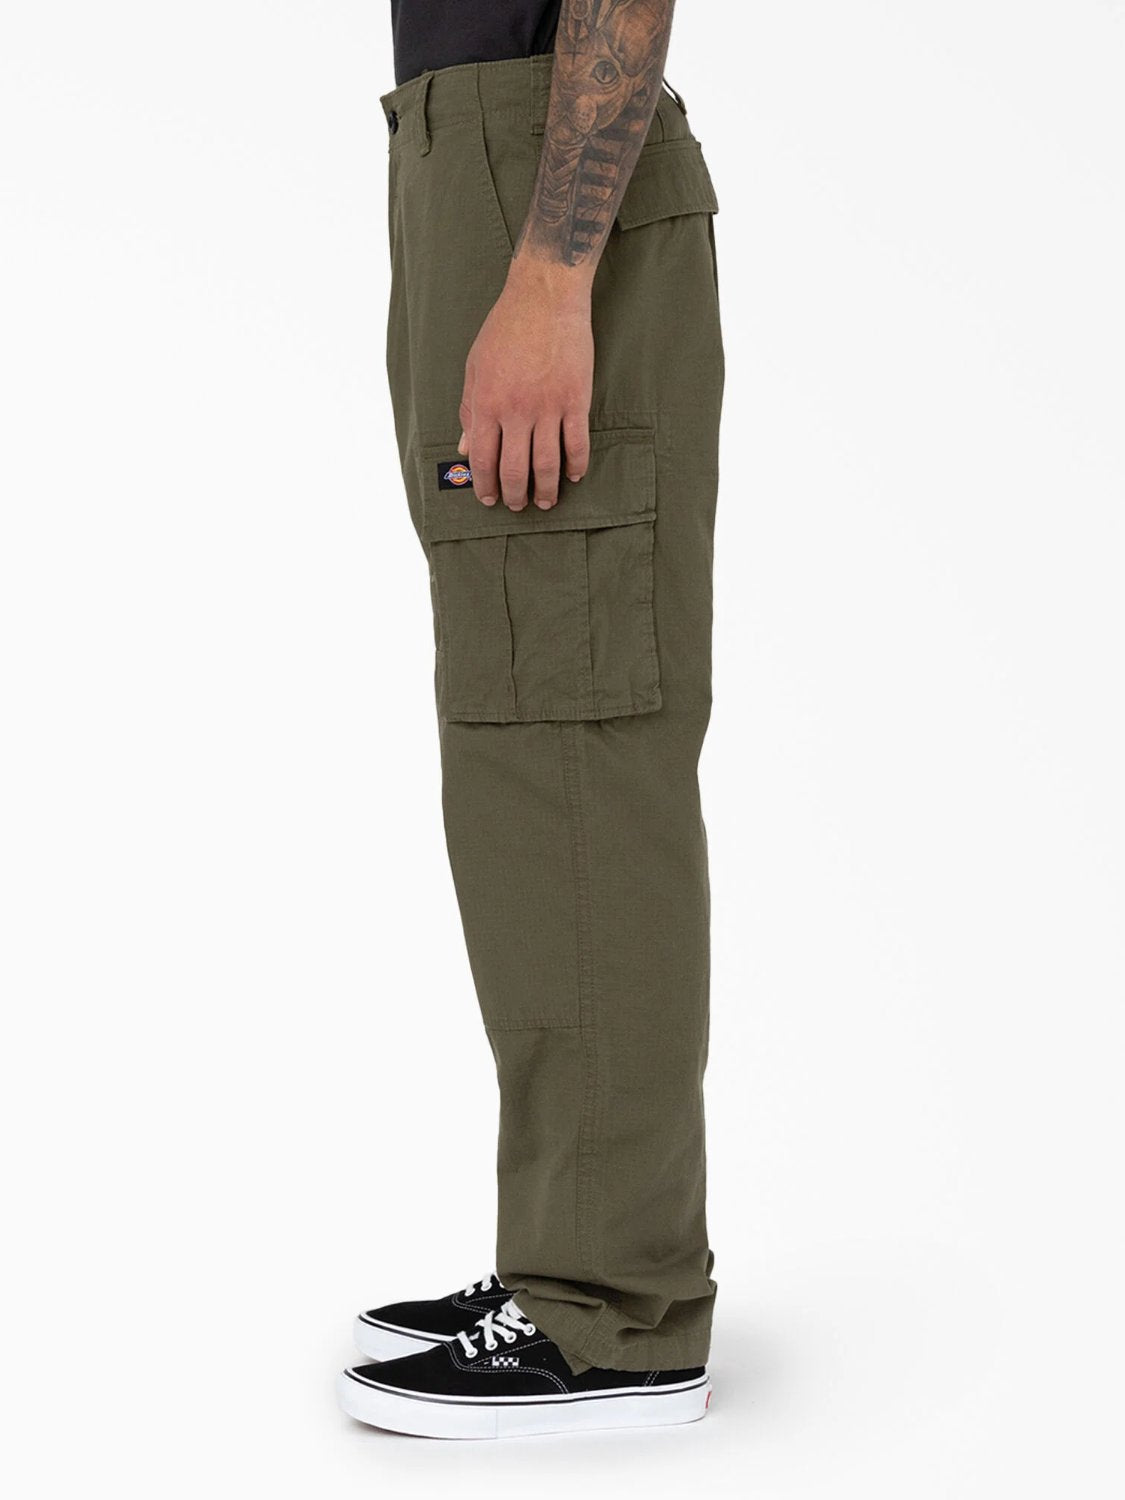 DICKIES EAGLE BEND RELAXED FIT DOUBLE KNEE CARGO PANT MILITARY GREEN